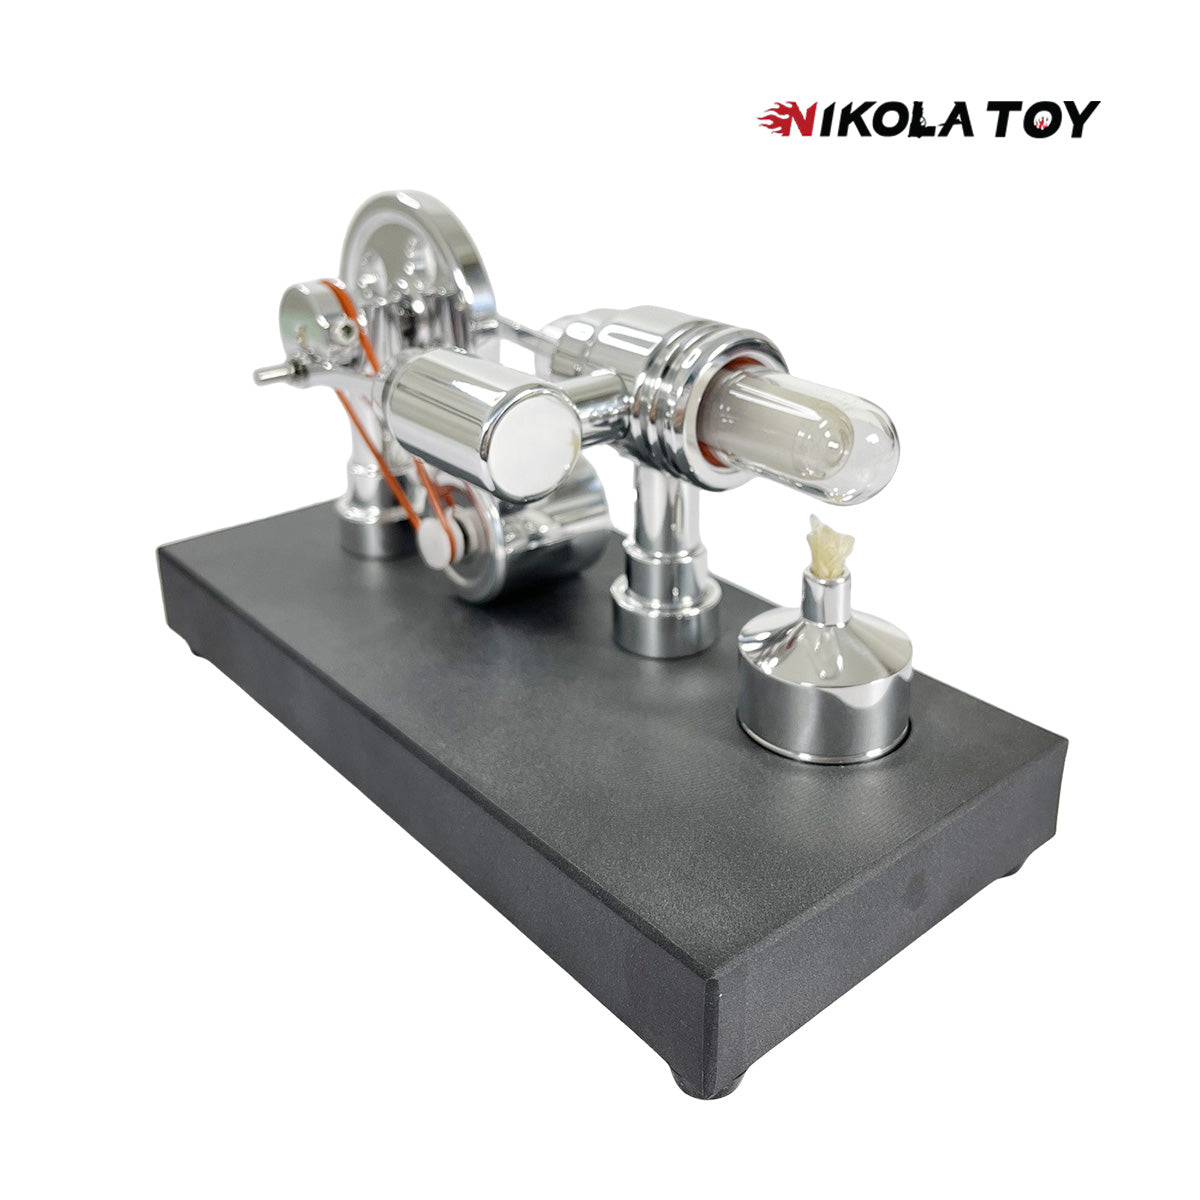 Mirror polished Stirling engine with embedded voltmeter and USB plug